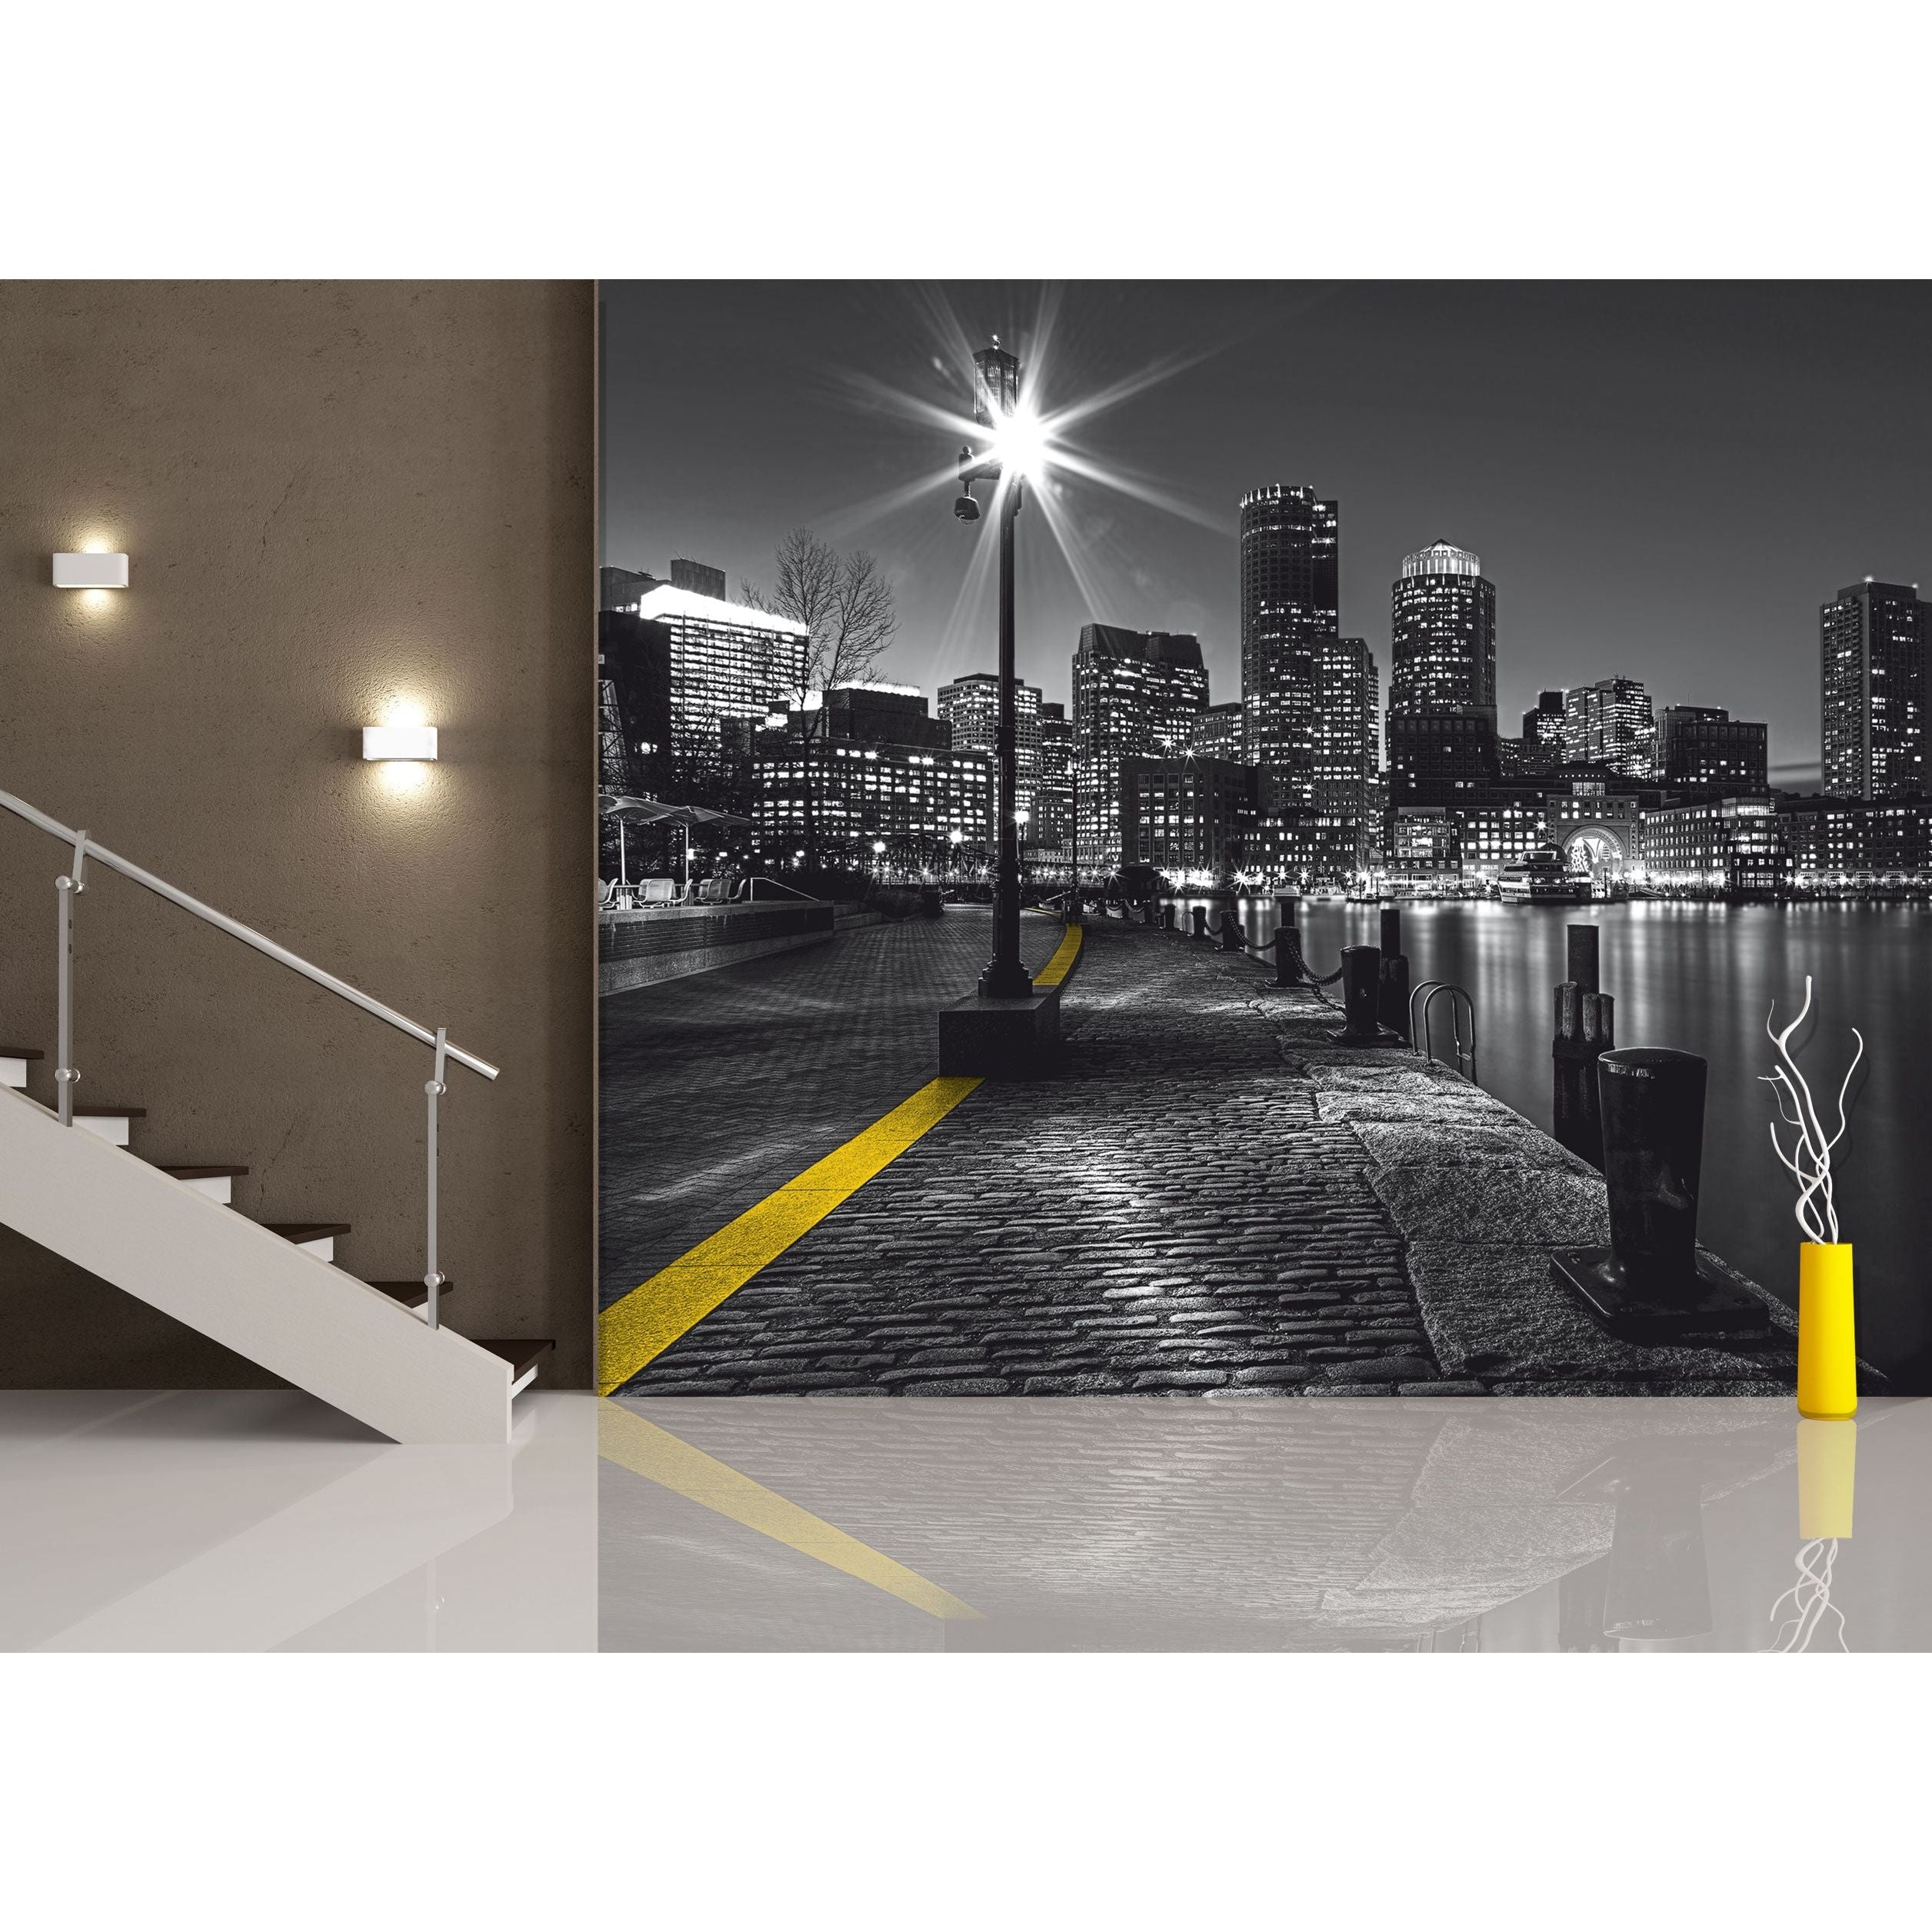 City Lights Reflection: Nighttime Waterfront Wall Mural